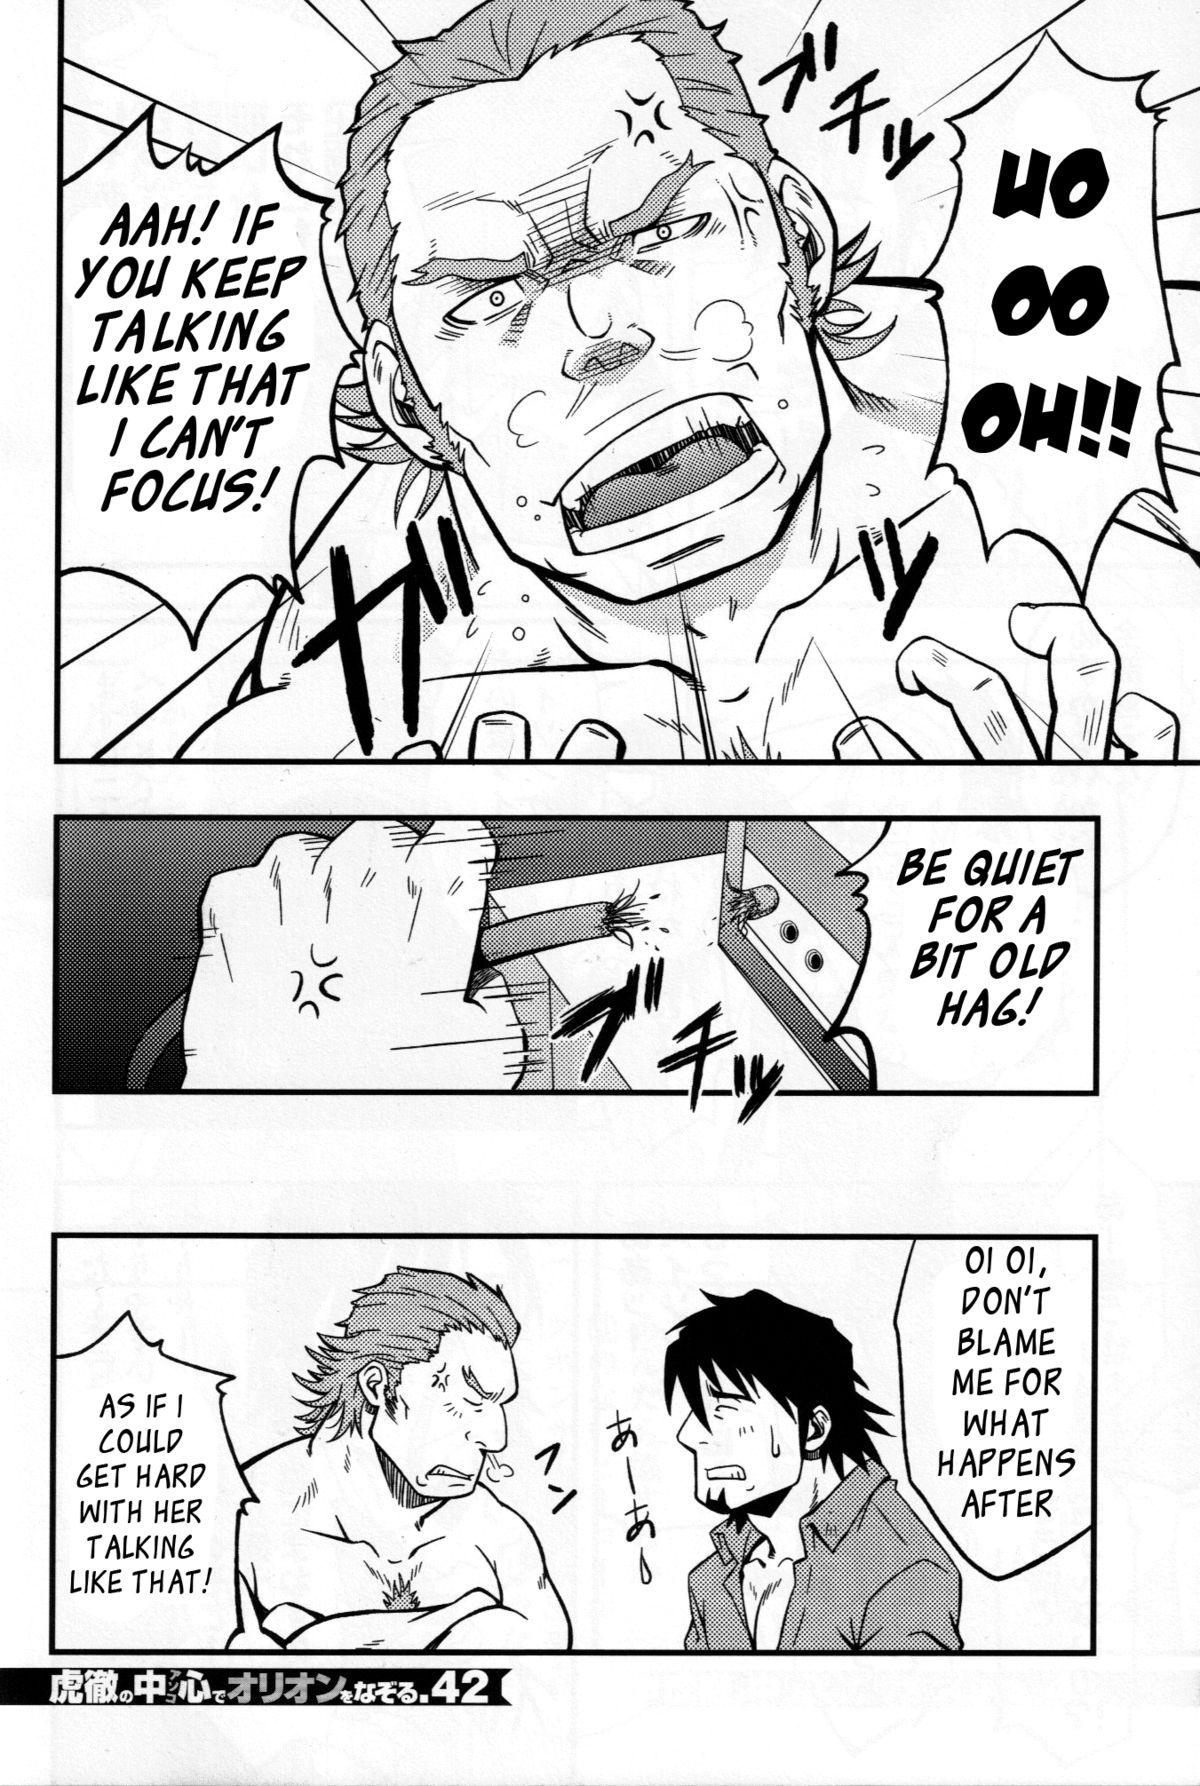 Bribe T&B - Tiger and bunny Tight Cunt - Page 4